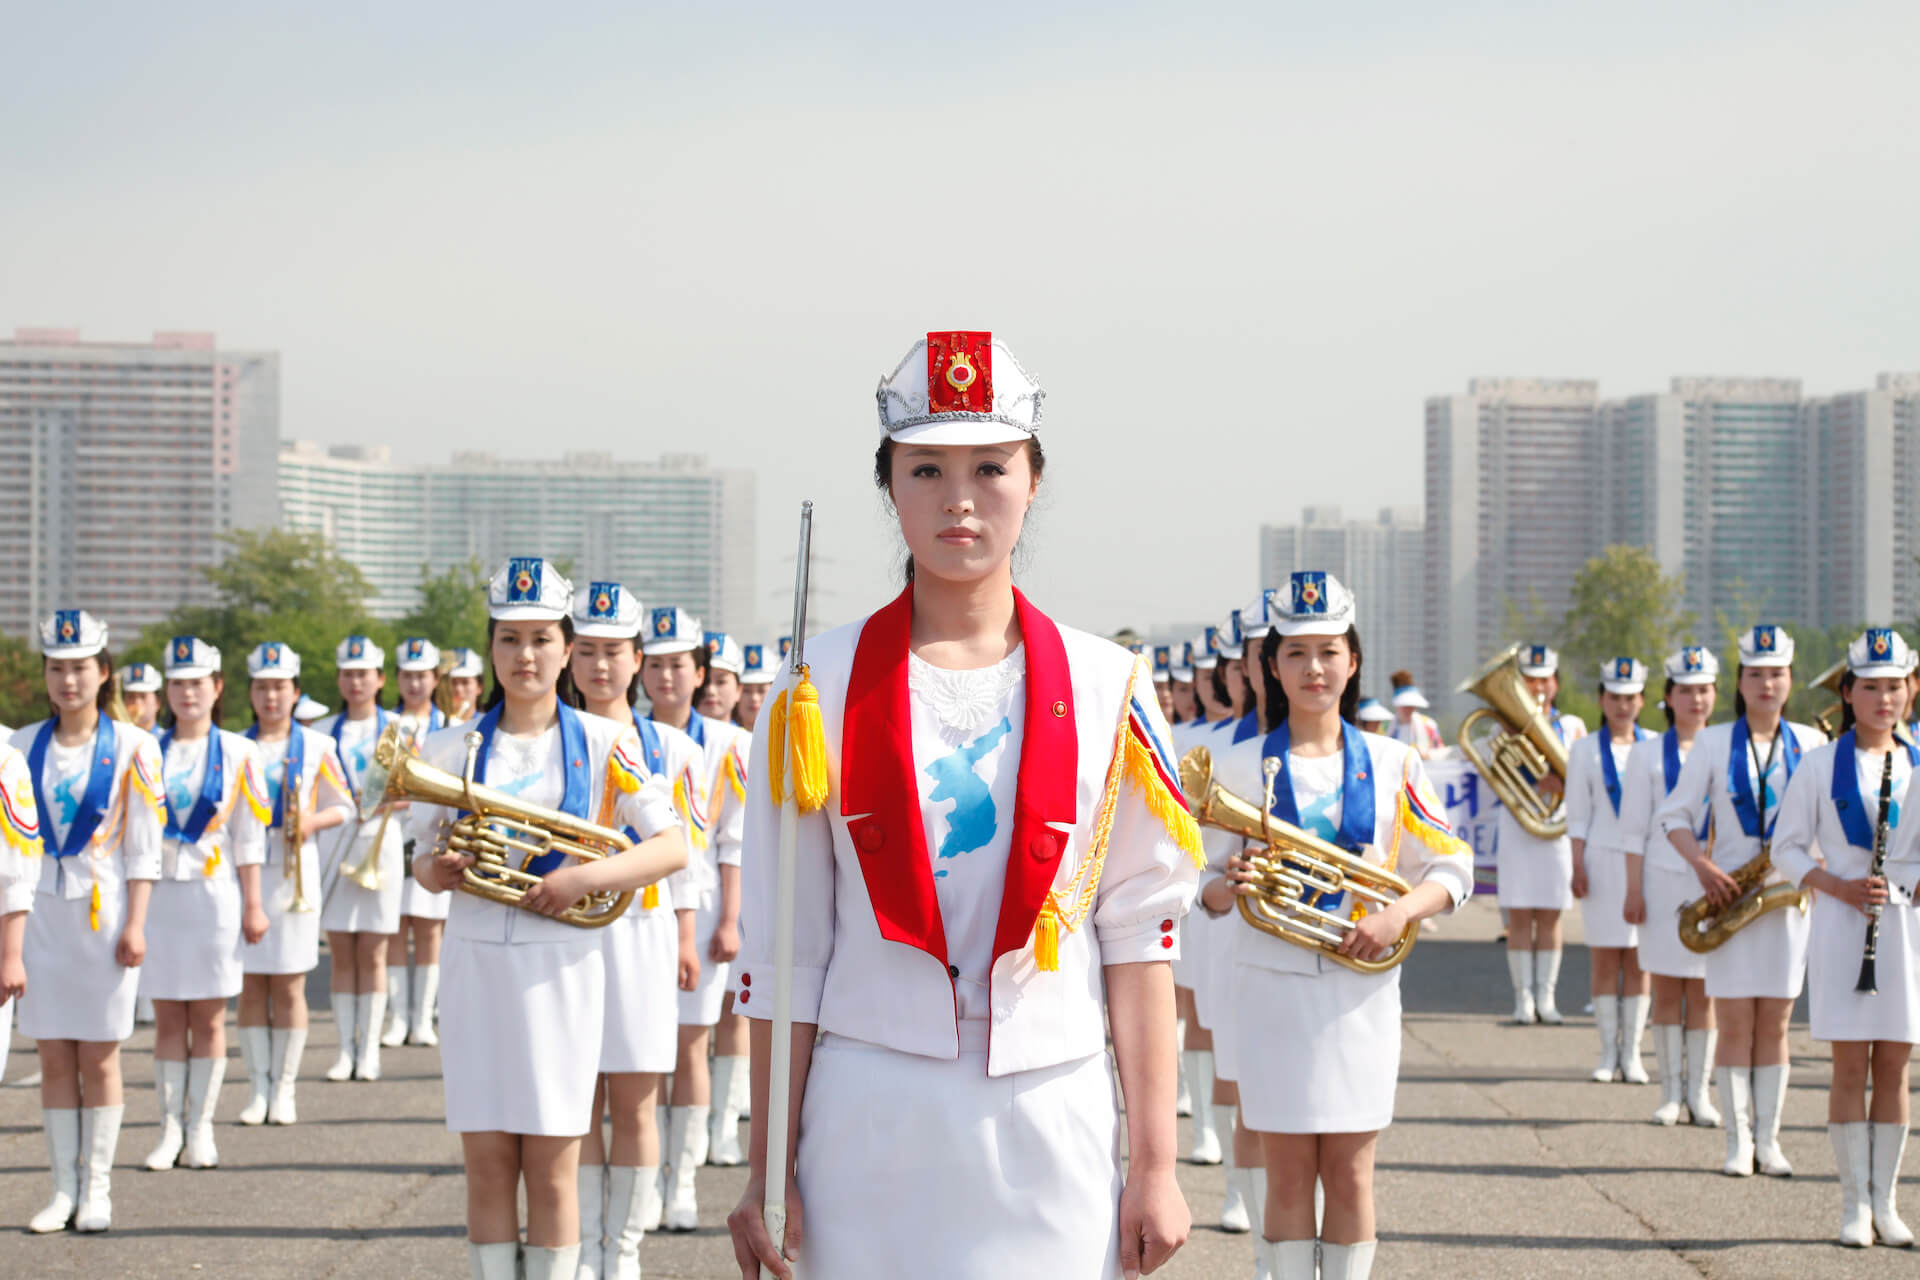 Medium shot of a Korean woman dressed in white, with the shape of Korea in her t-shirt, on the back there are more women in lines, dressed in white as well and some of them hold instruments.